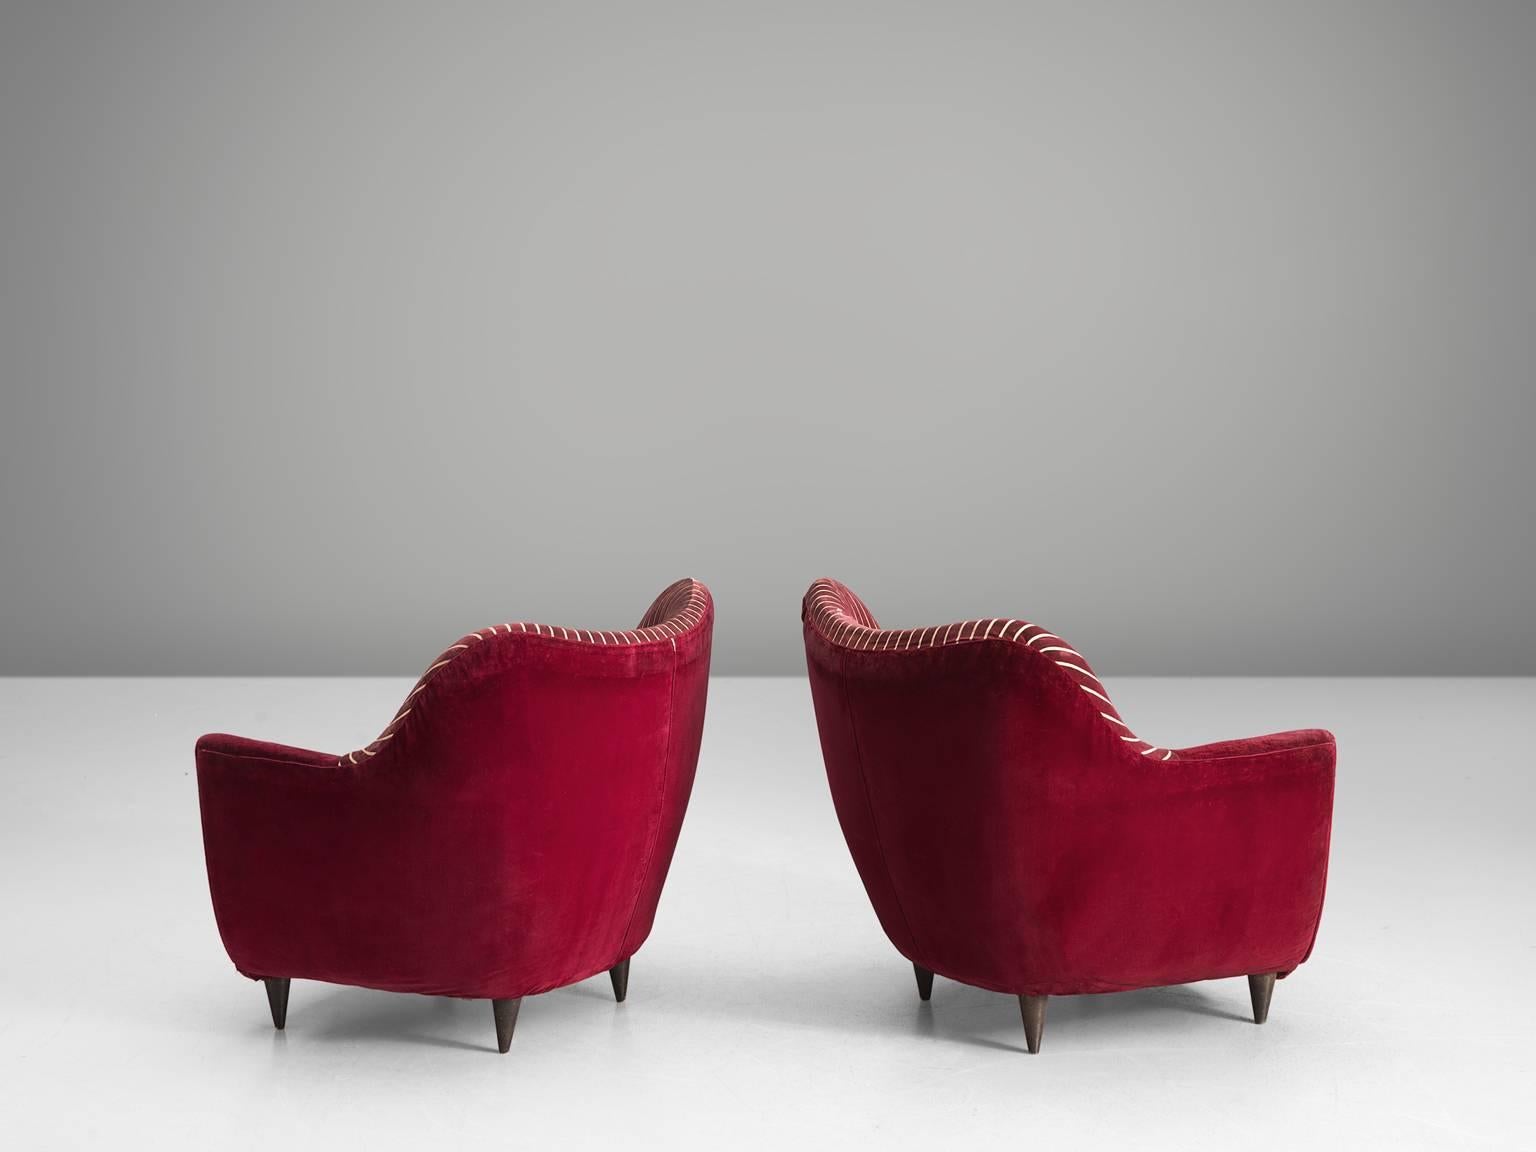 Mid-20th Century Italian Club Chairs in Deep Red Fabric, 1950s